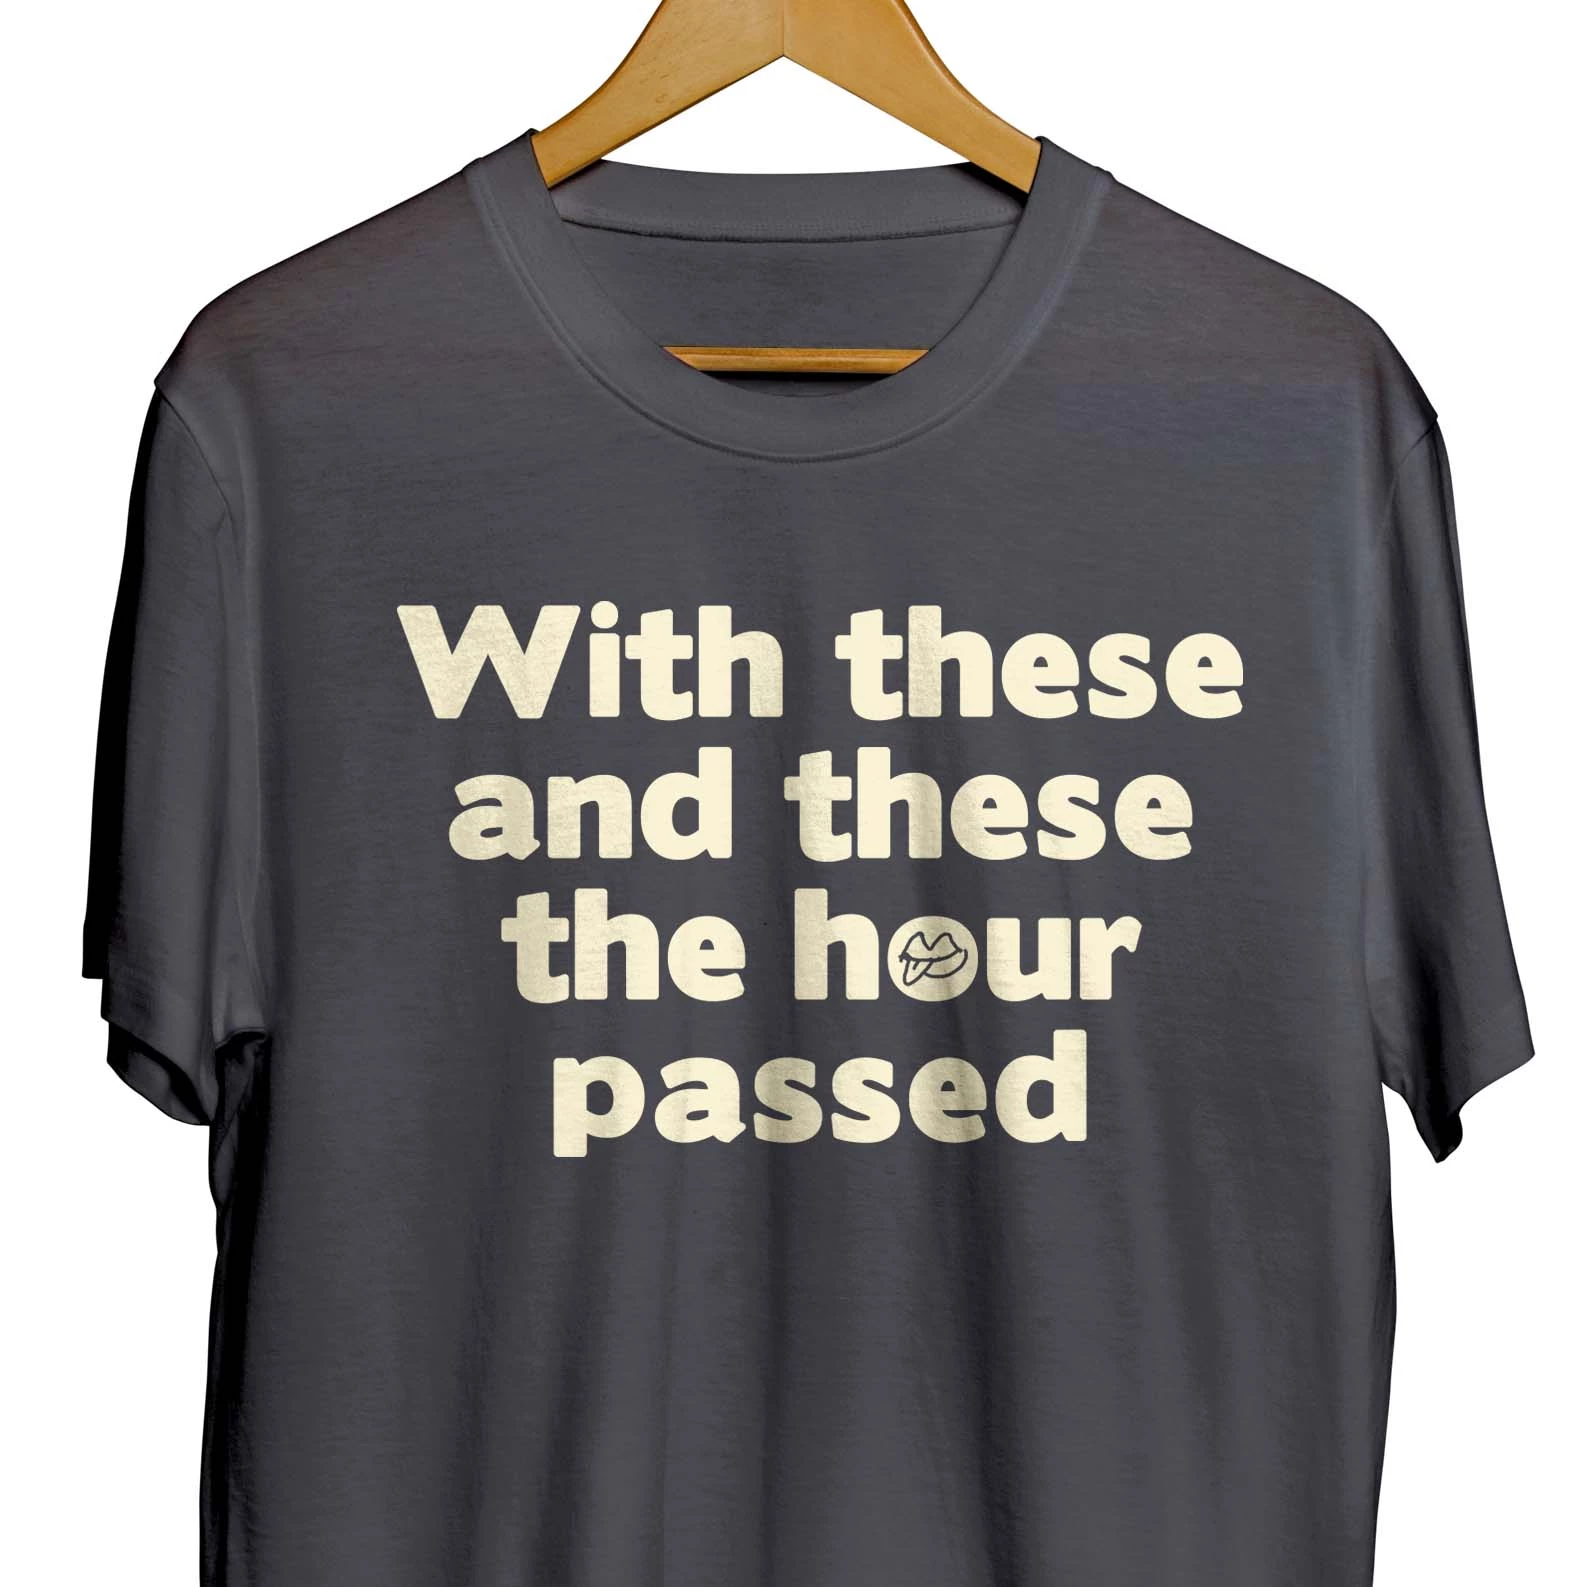 With these and these the hour passed T-shirt